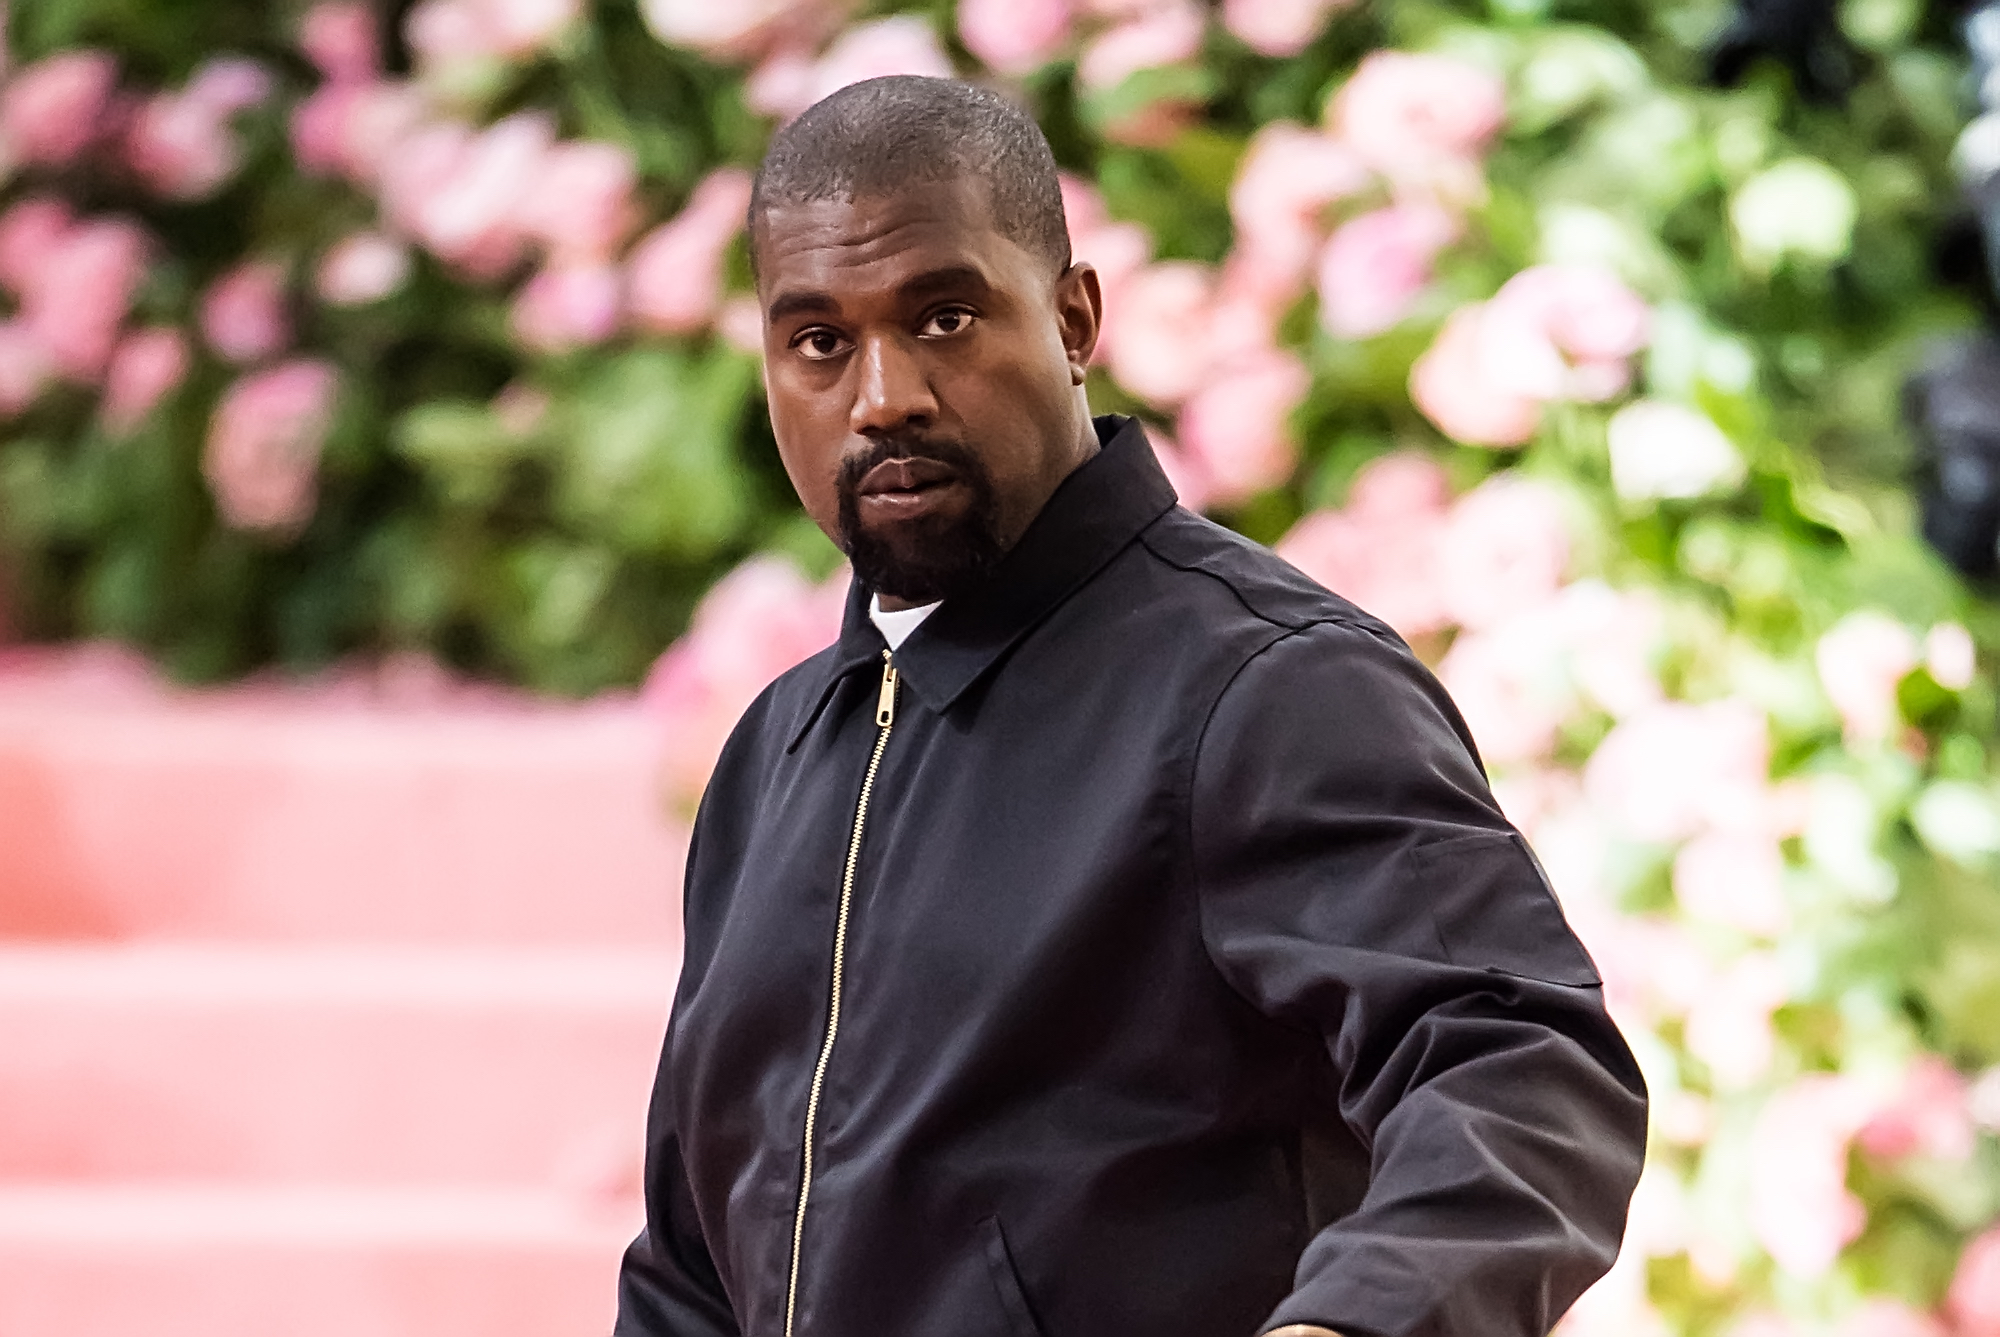 Kanye West looking at the camera, not smiling, in front of a blurry pink and green background